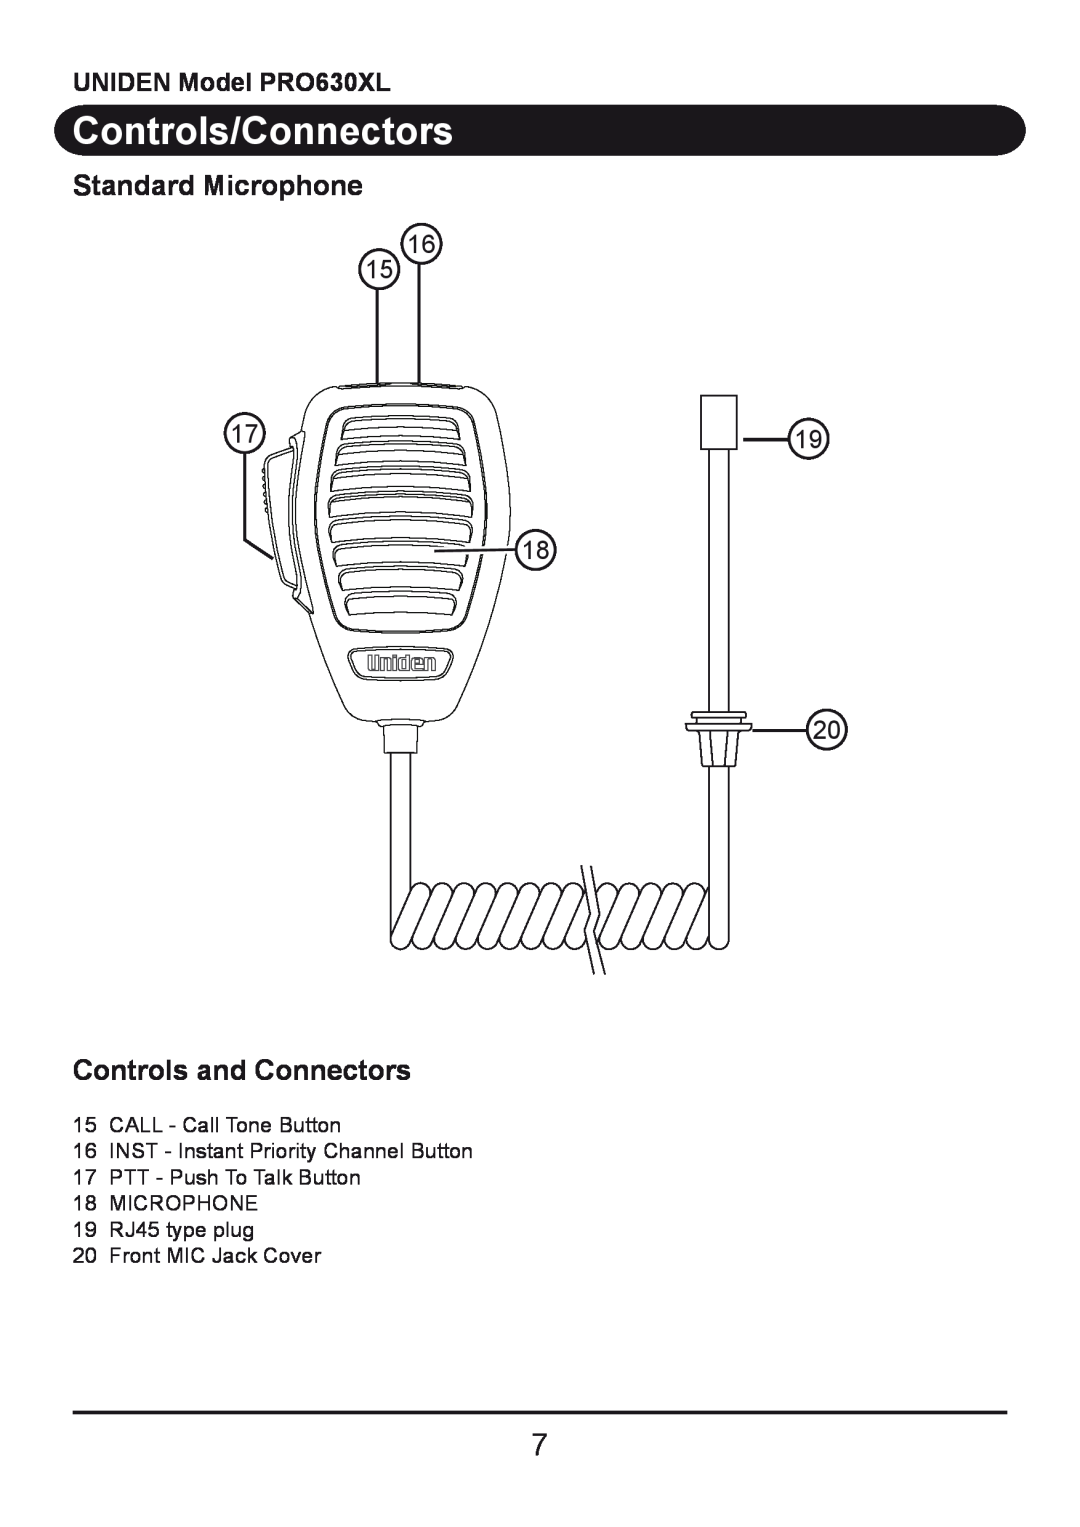 Uniden owner manual Standard Microphone, Controls and Connectors, Controls/Connectors, UNIDEN Model PRO630XL 